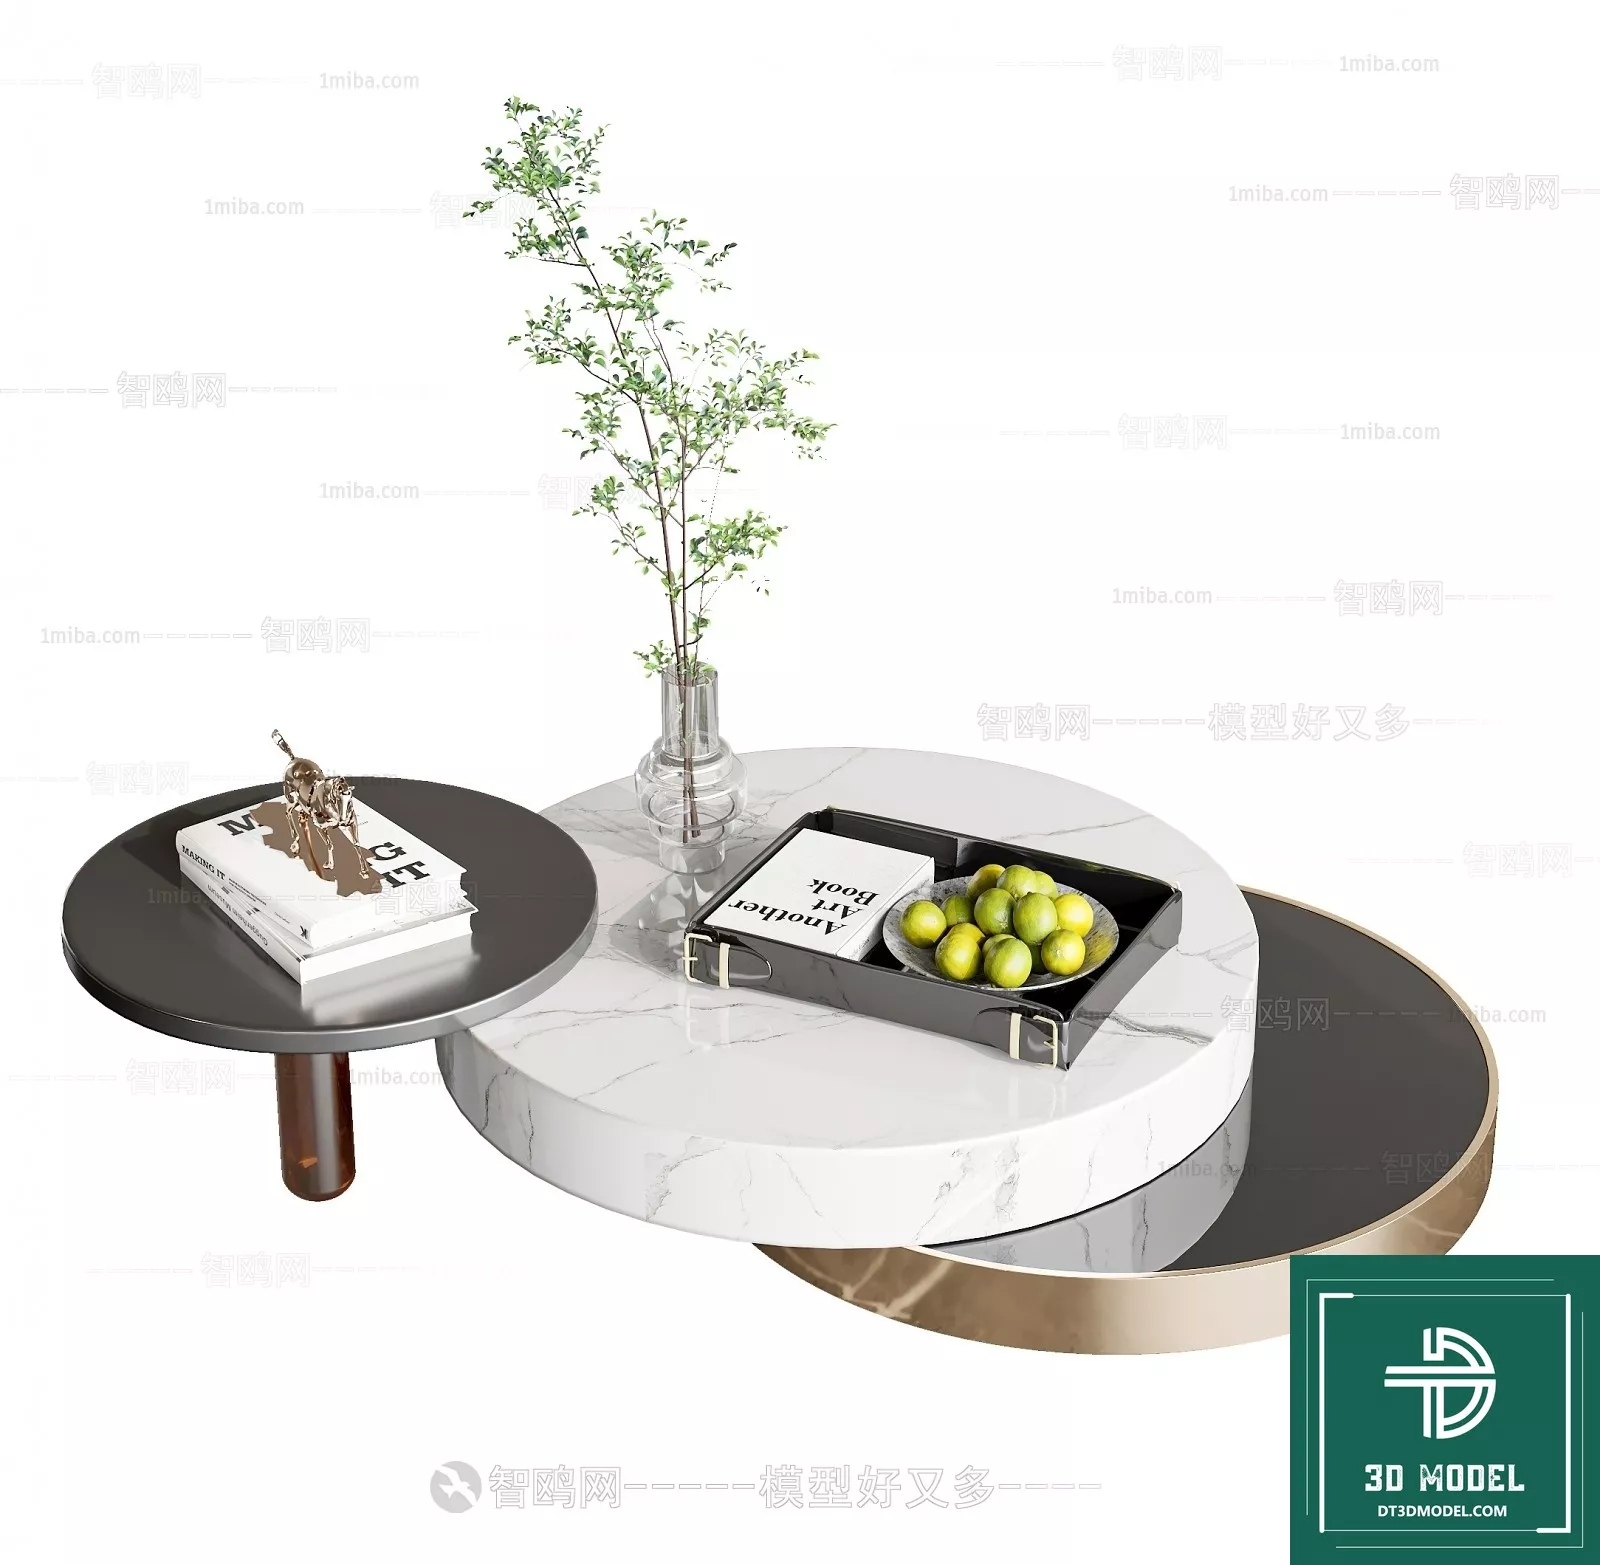 MODERN TEA TABLE - SKETCHUP 3D MODEL - VRAY OR ENSCAPE - ID14999